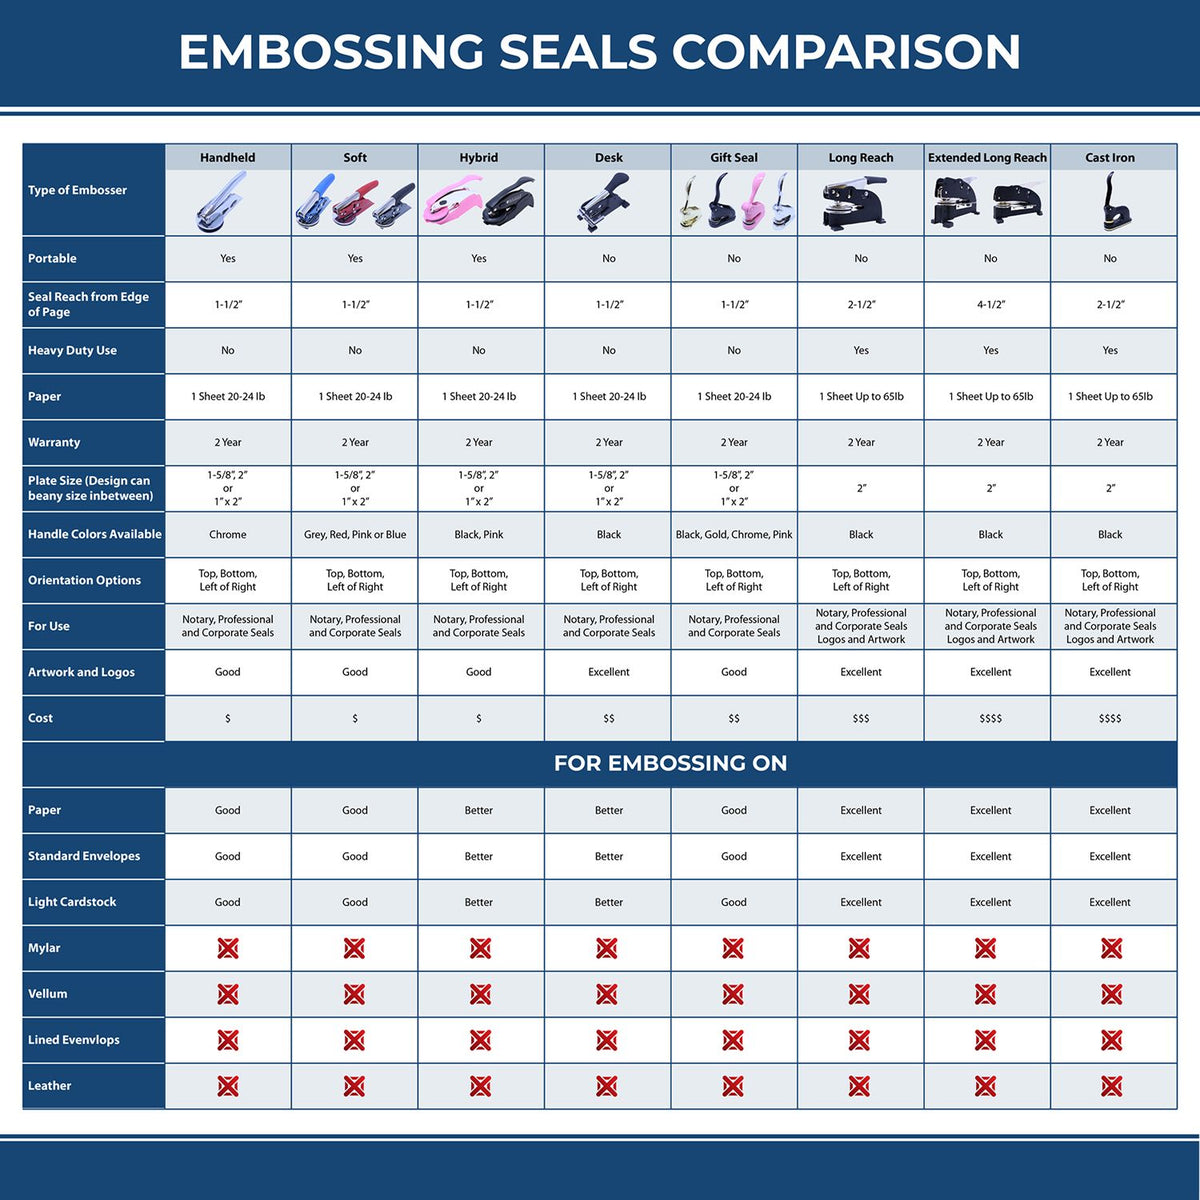 A comparison chart for the different types of mount models available for the Soft Pocket Nevada Landscape Architect Embosser.